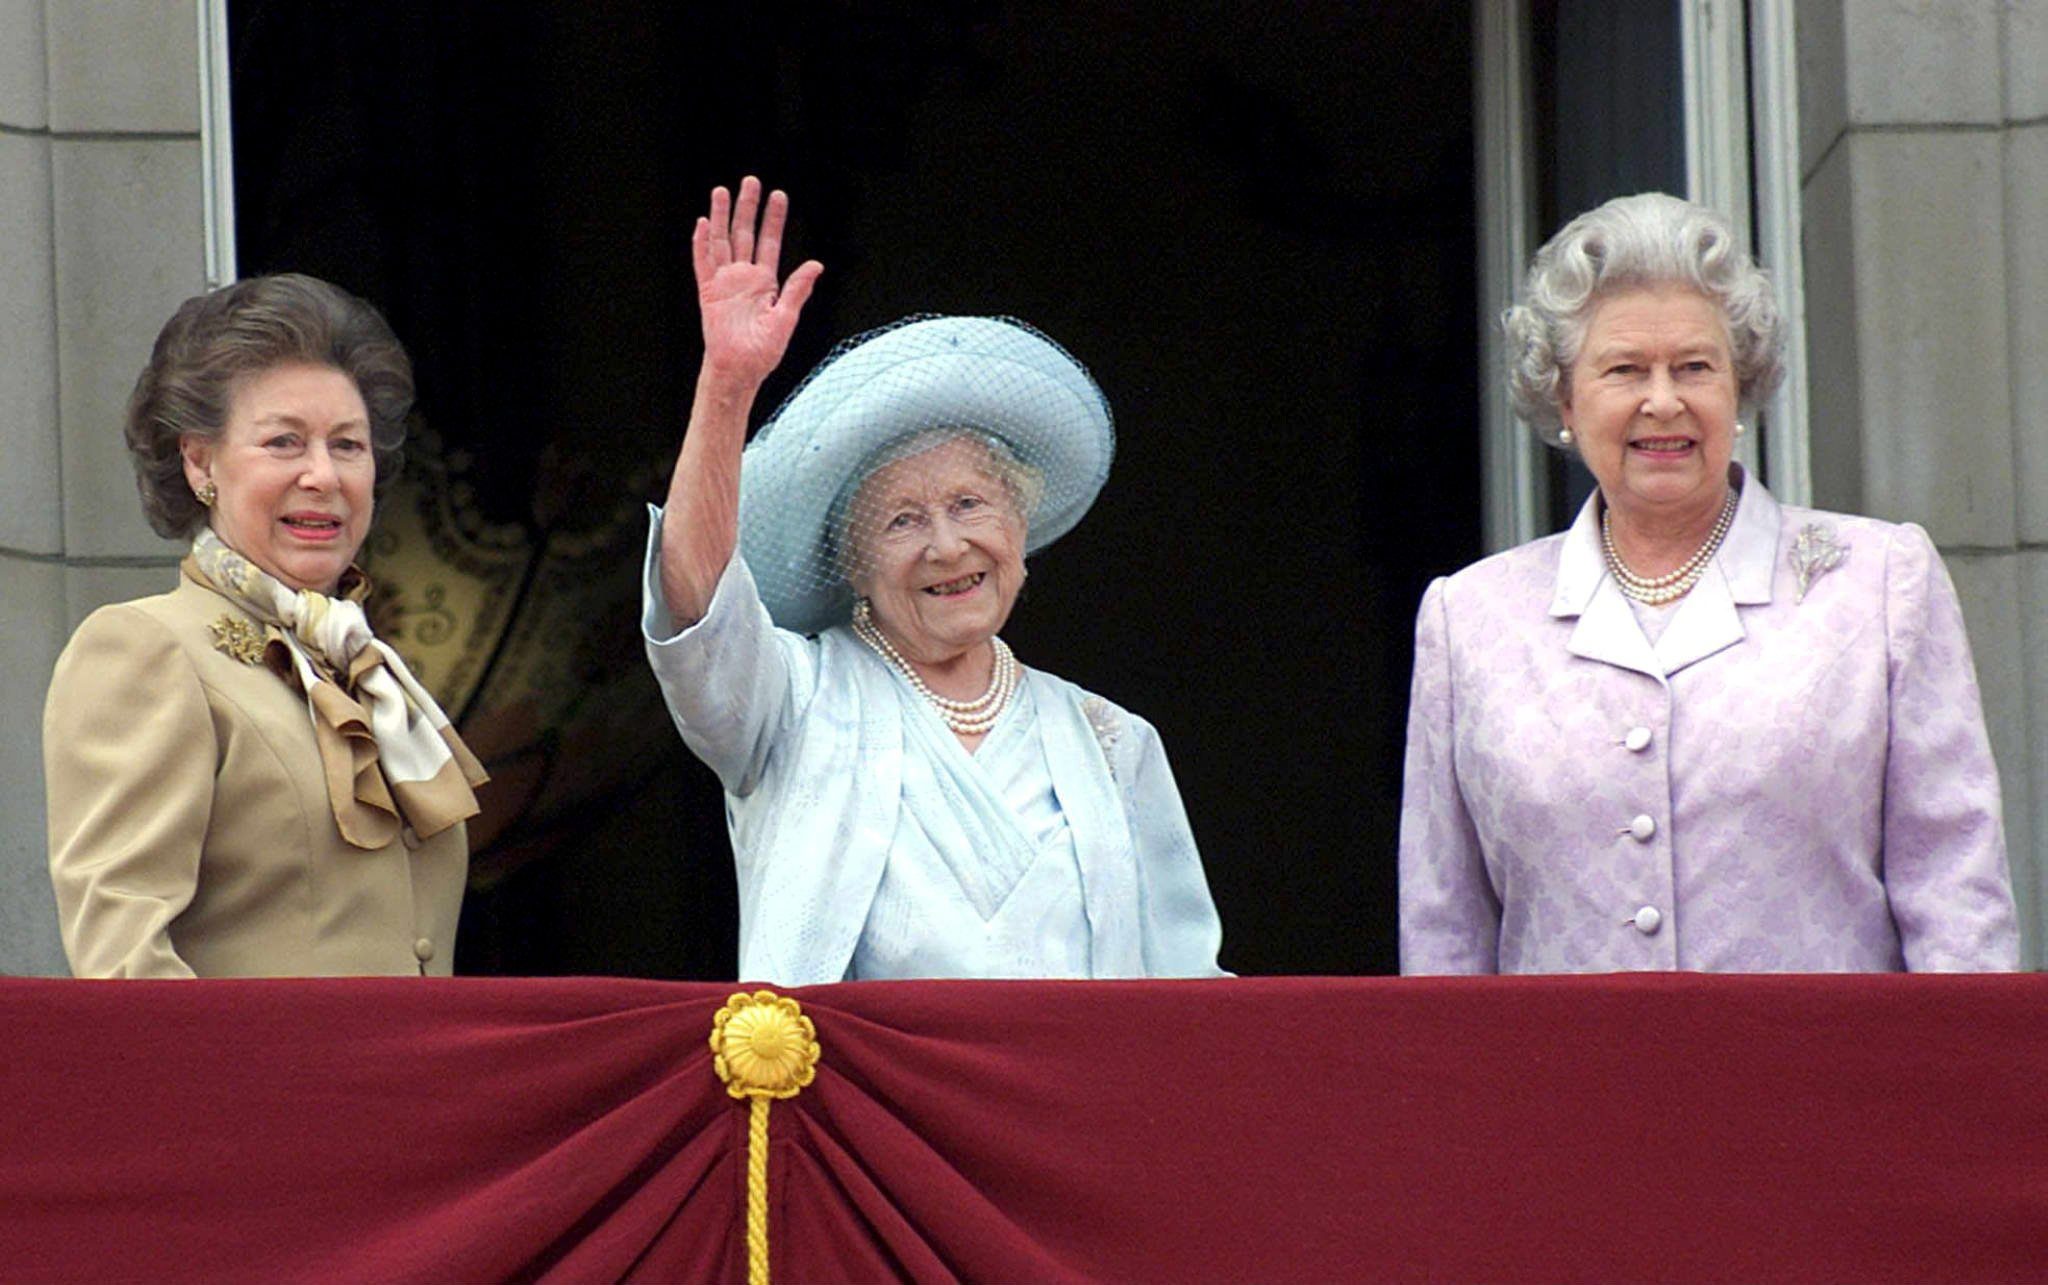 Margaret is pictured on the balcony of Buckingham Palace during celebrations for the Queen Mother's 100th birthday in August 2000